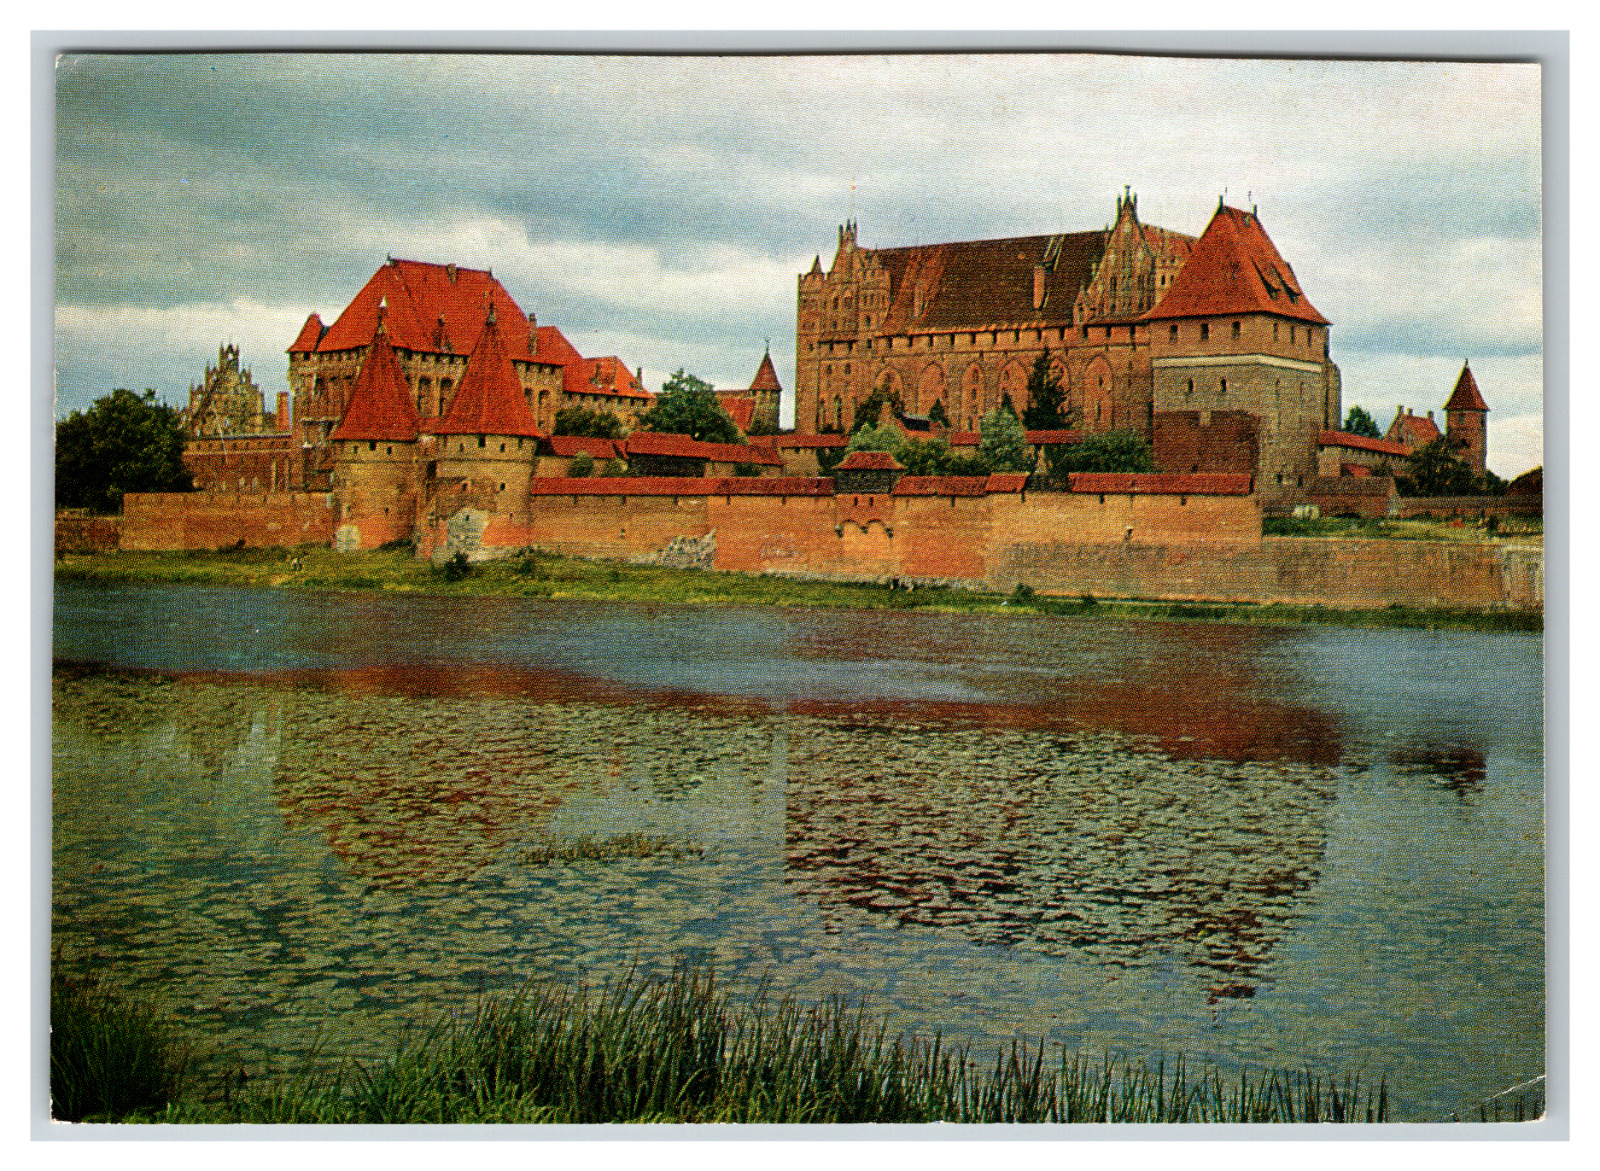 The Marienburg Castle Estate in Prussia, Germany Postcard Unposted